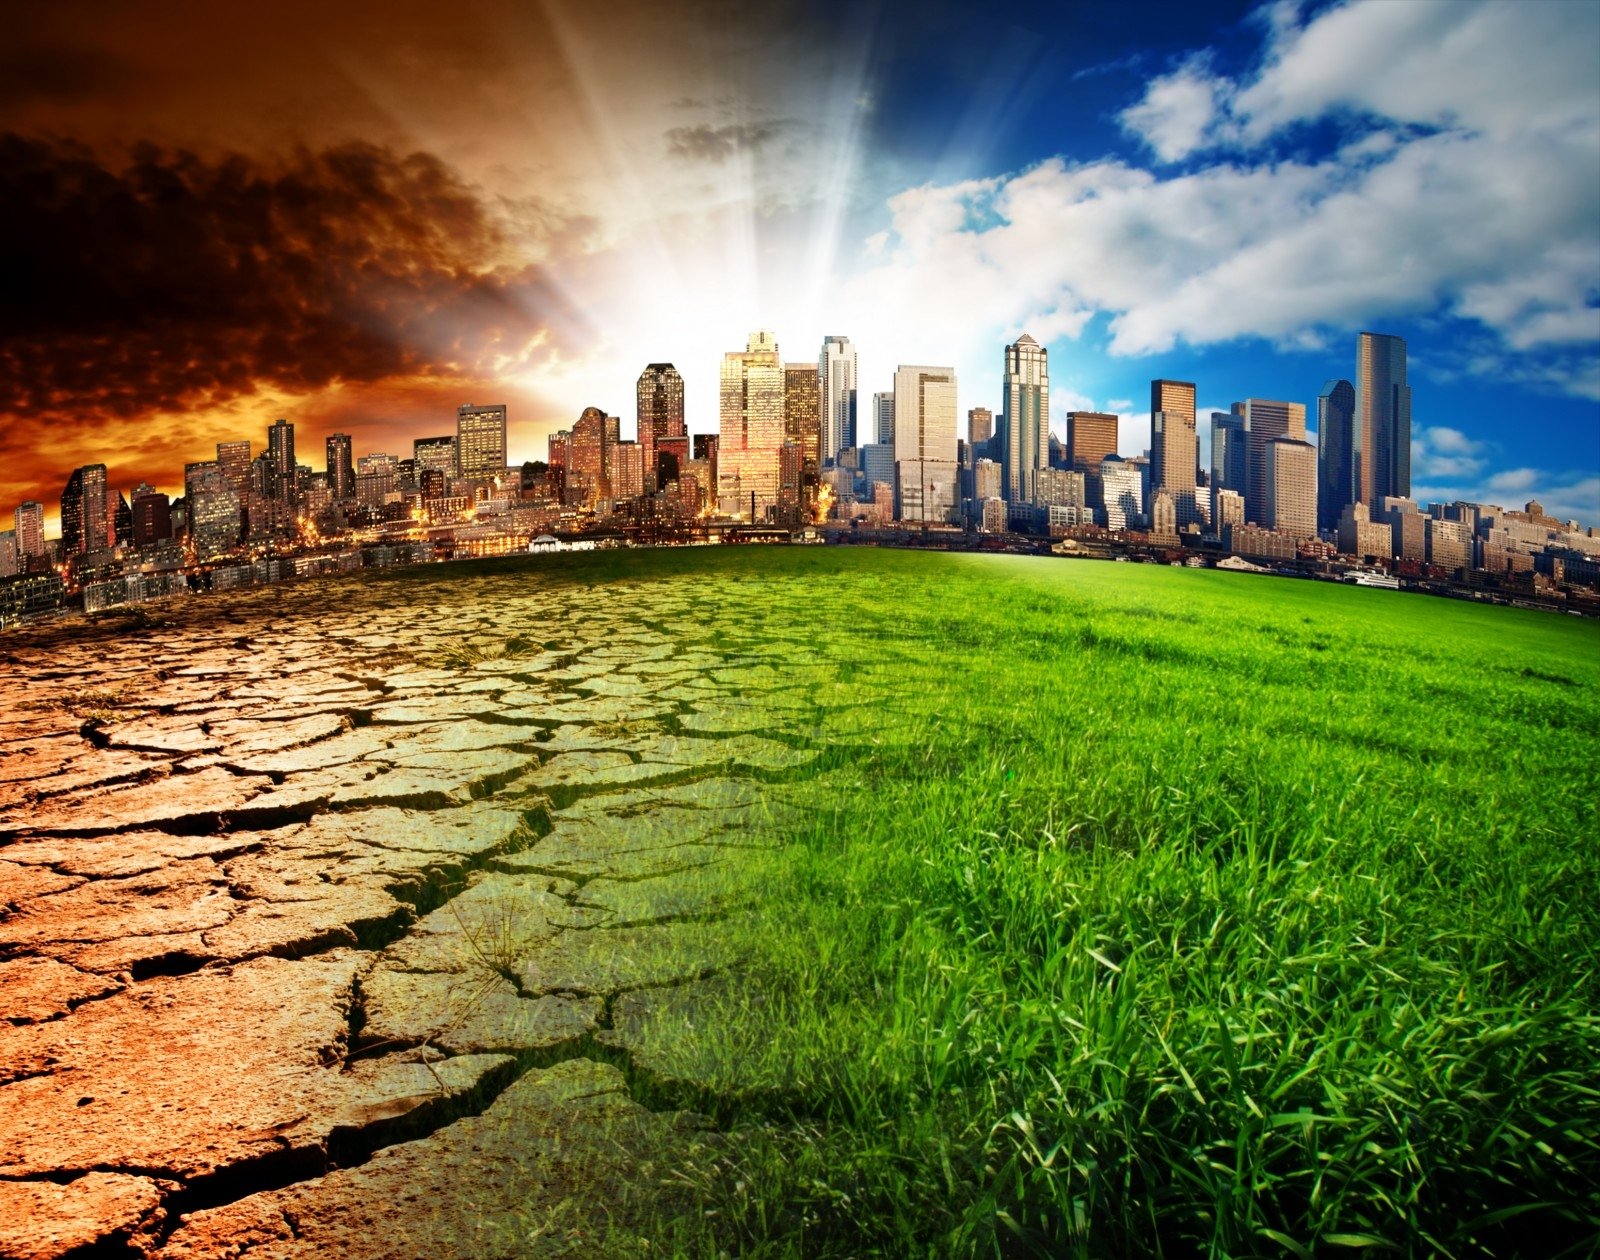 People, states should fight global warming - Lithuanian ...